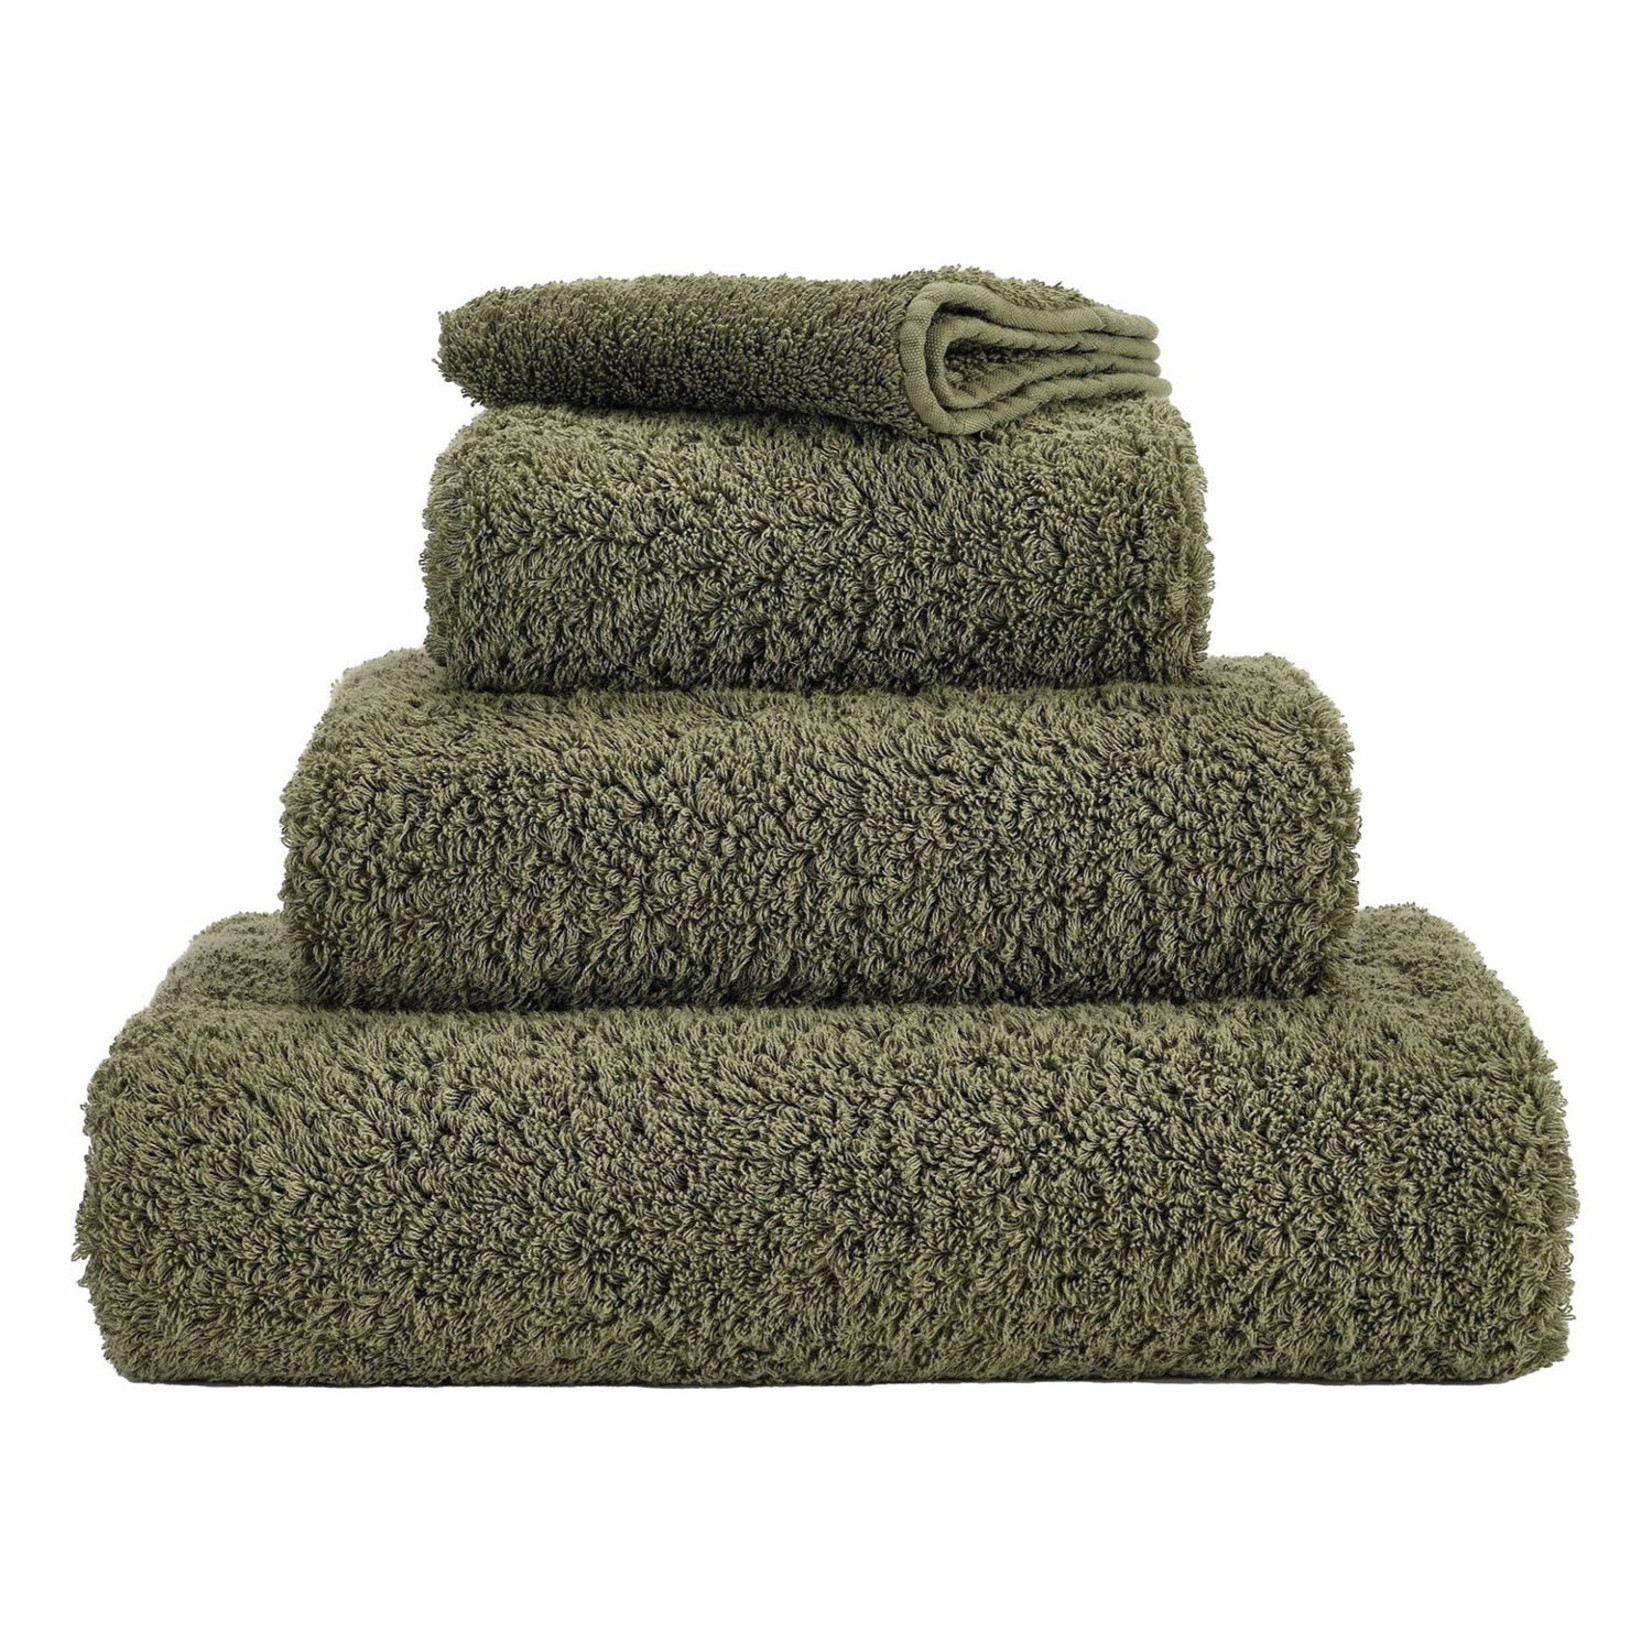 Abyss Abyss Super Pile Towels 275 Khaki